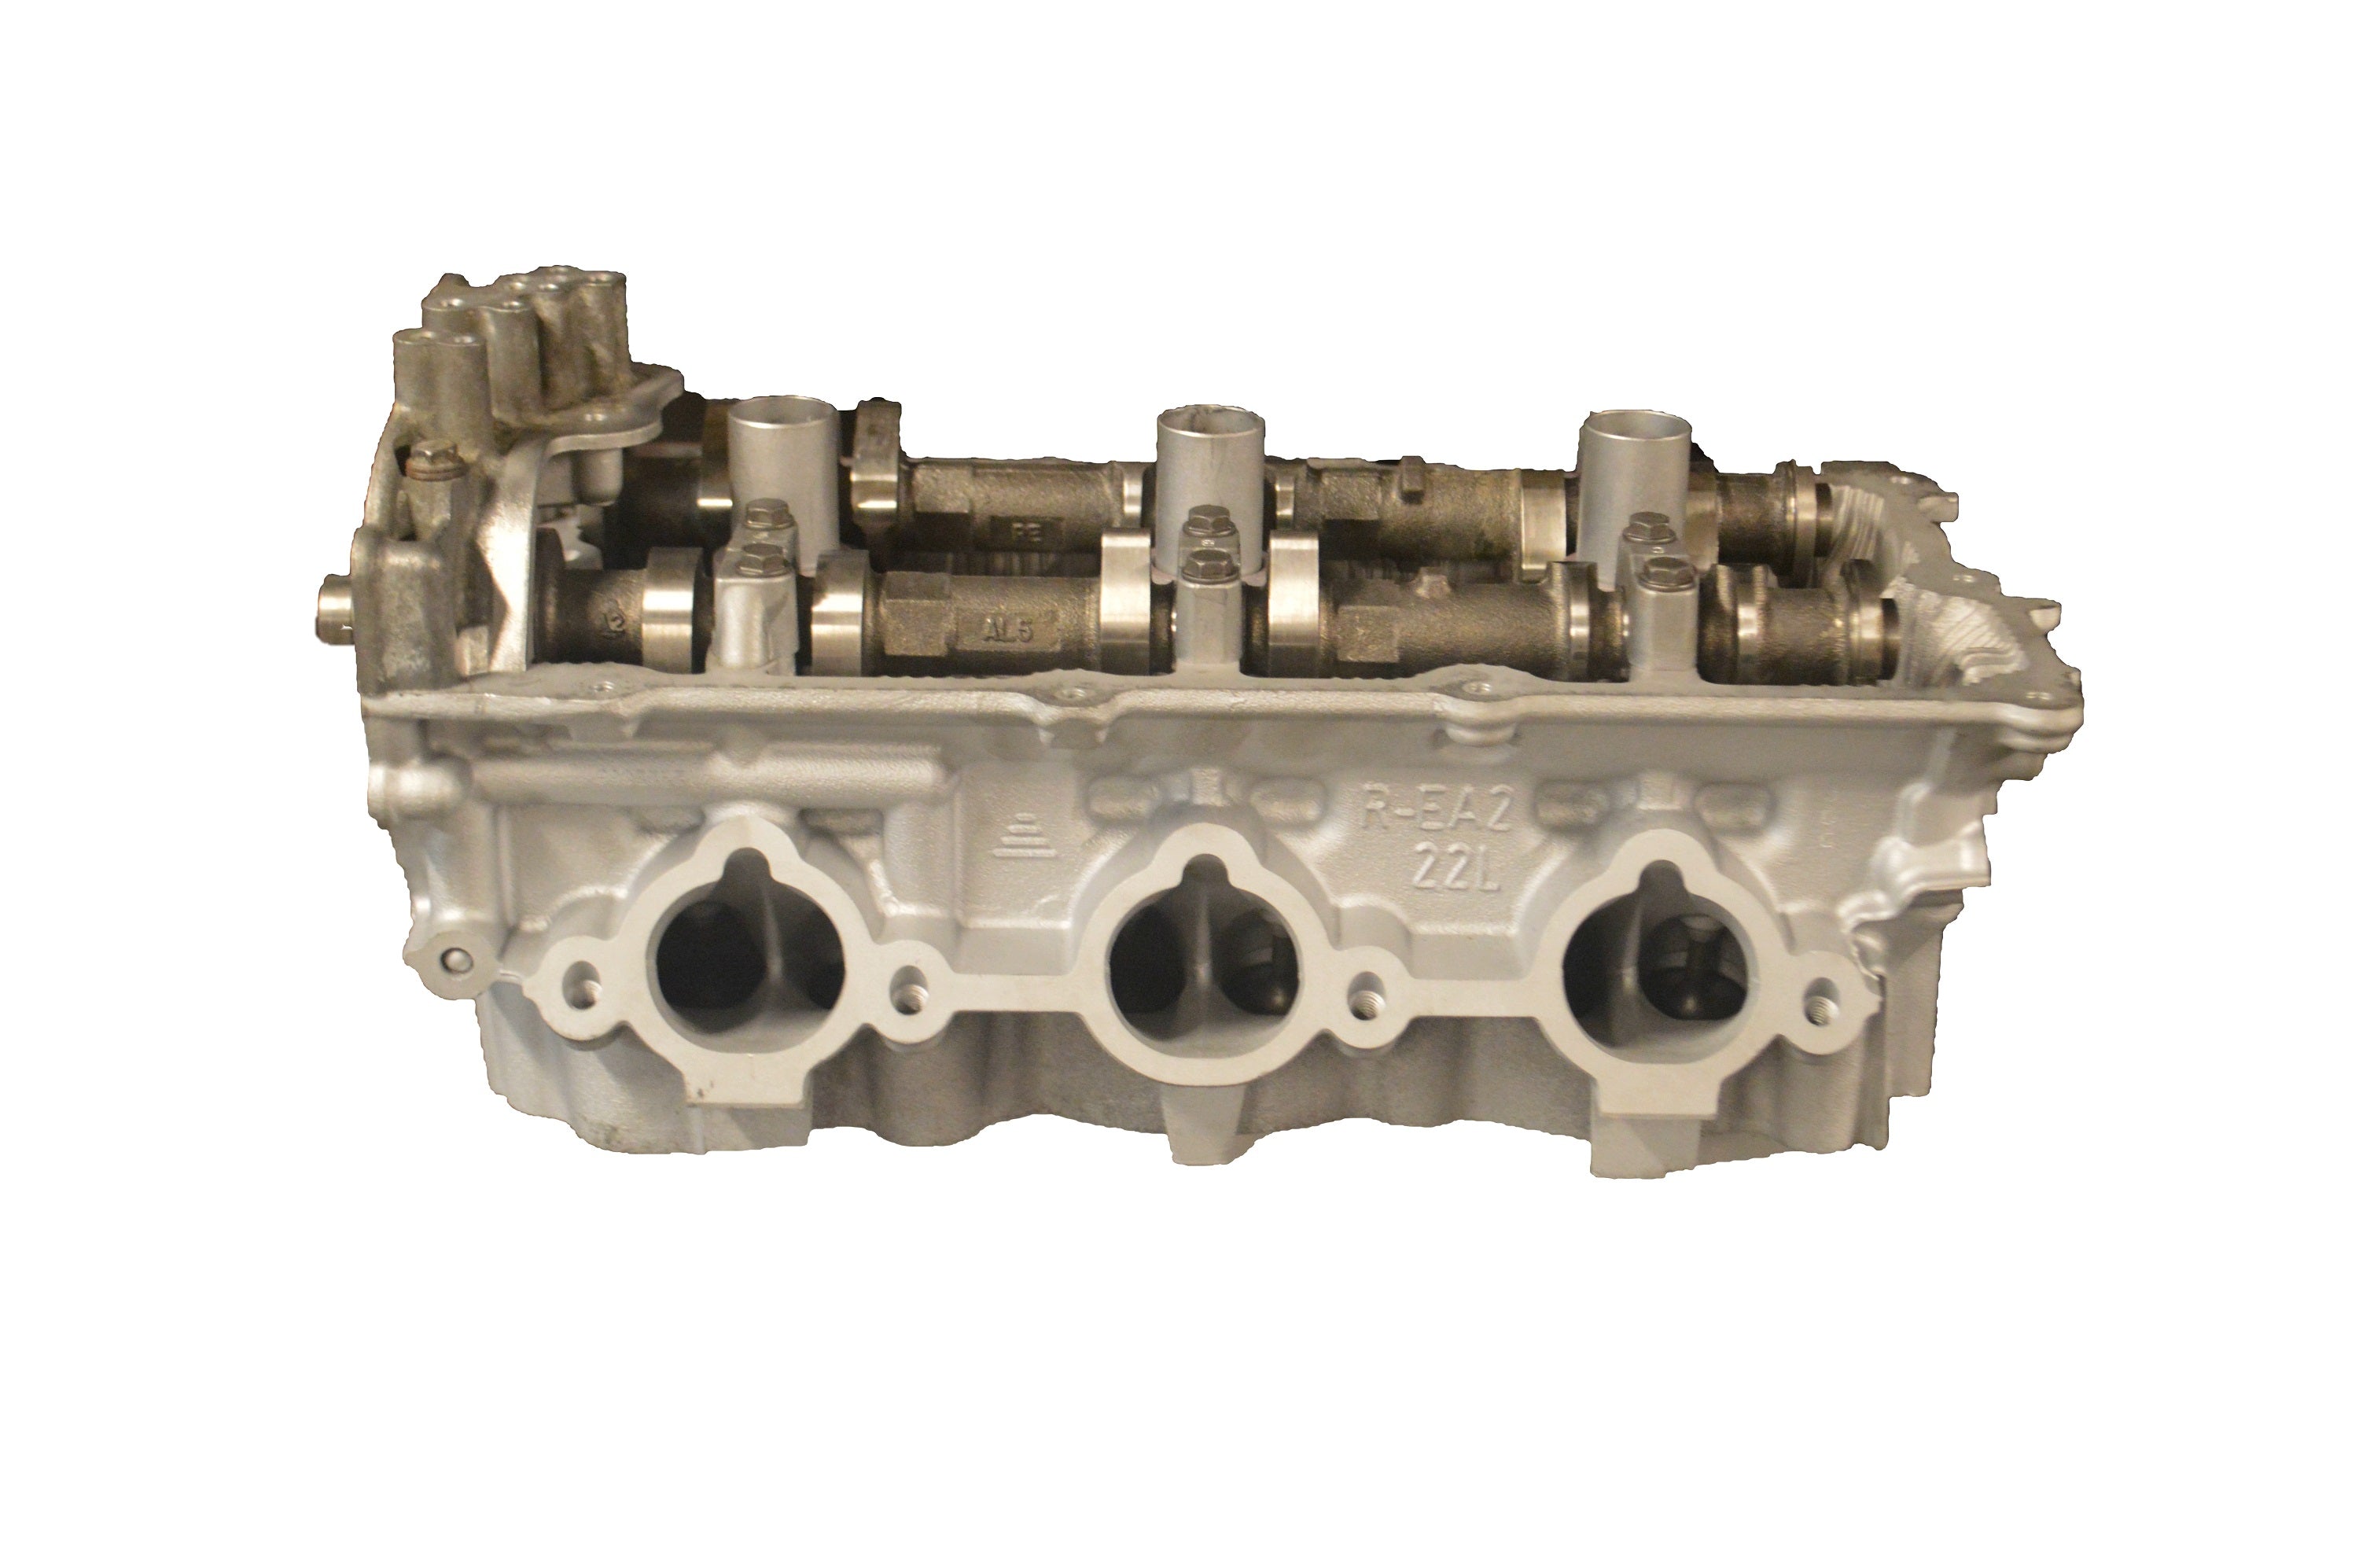 Shop for ENGINE QUEST Cylinder Heads and Components 